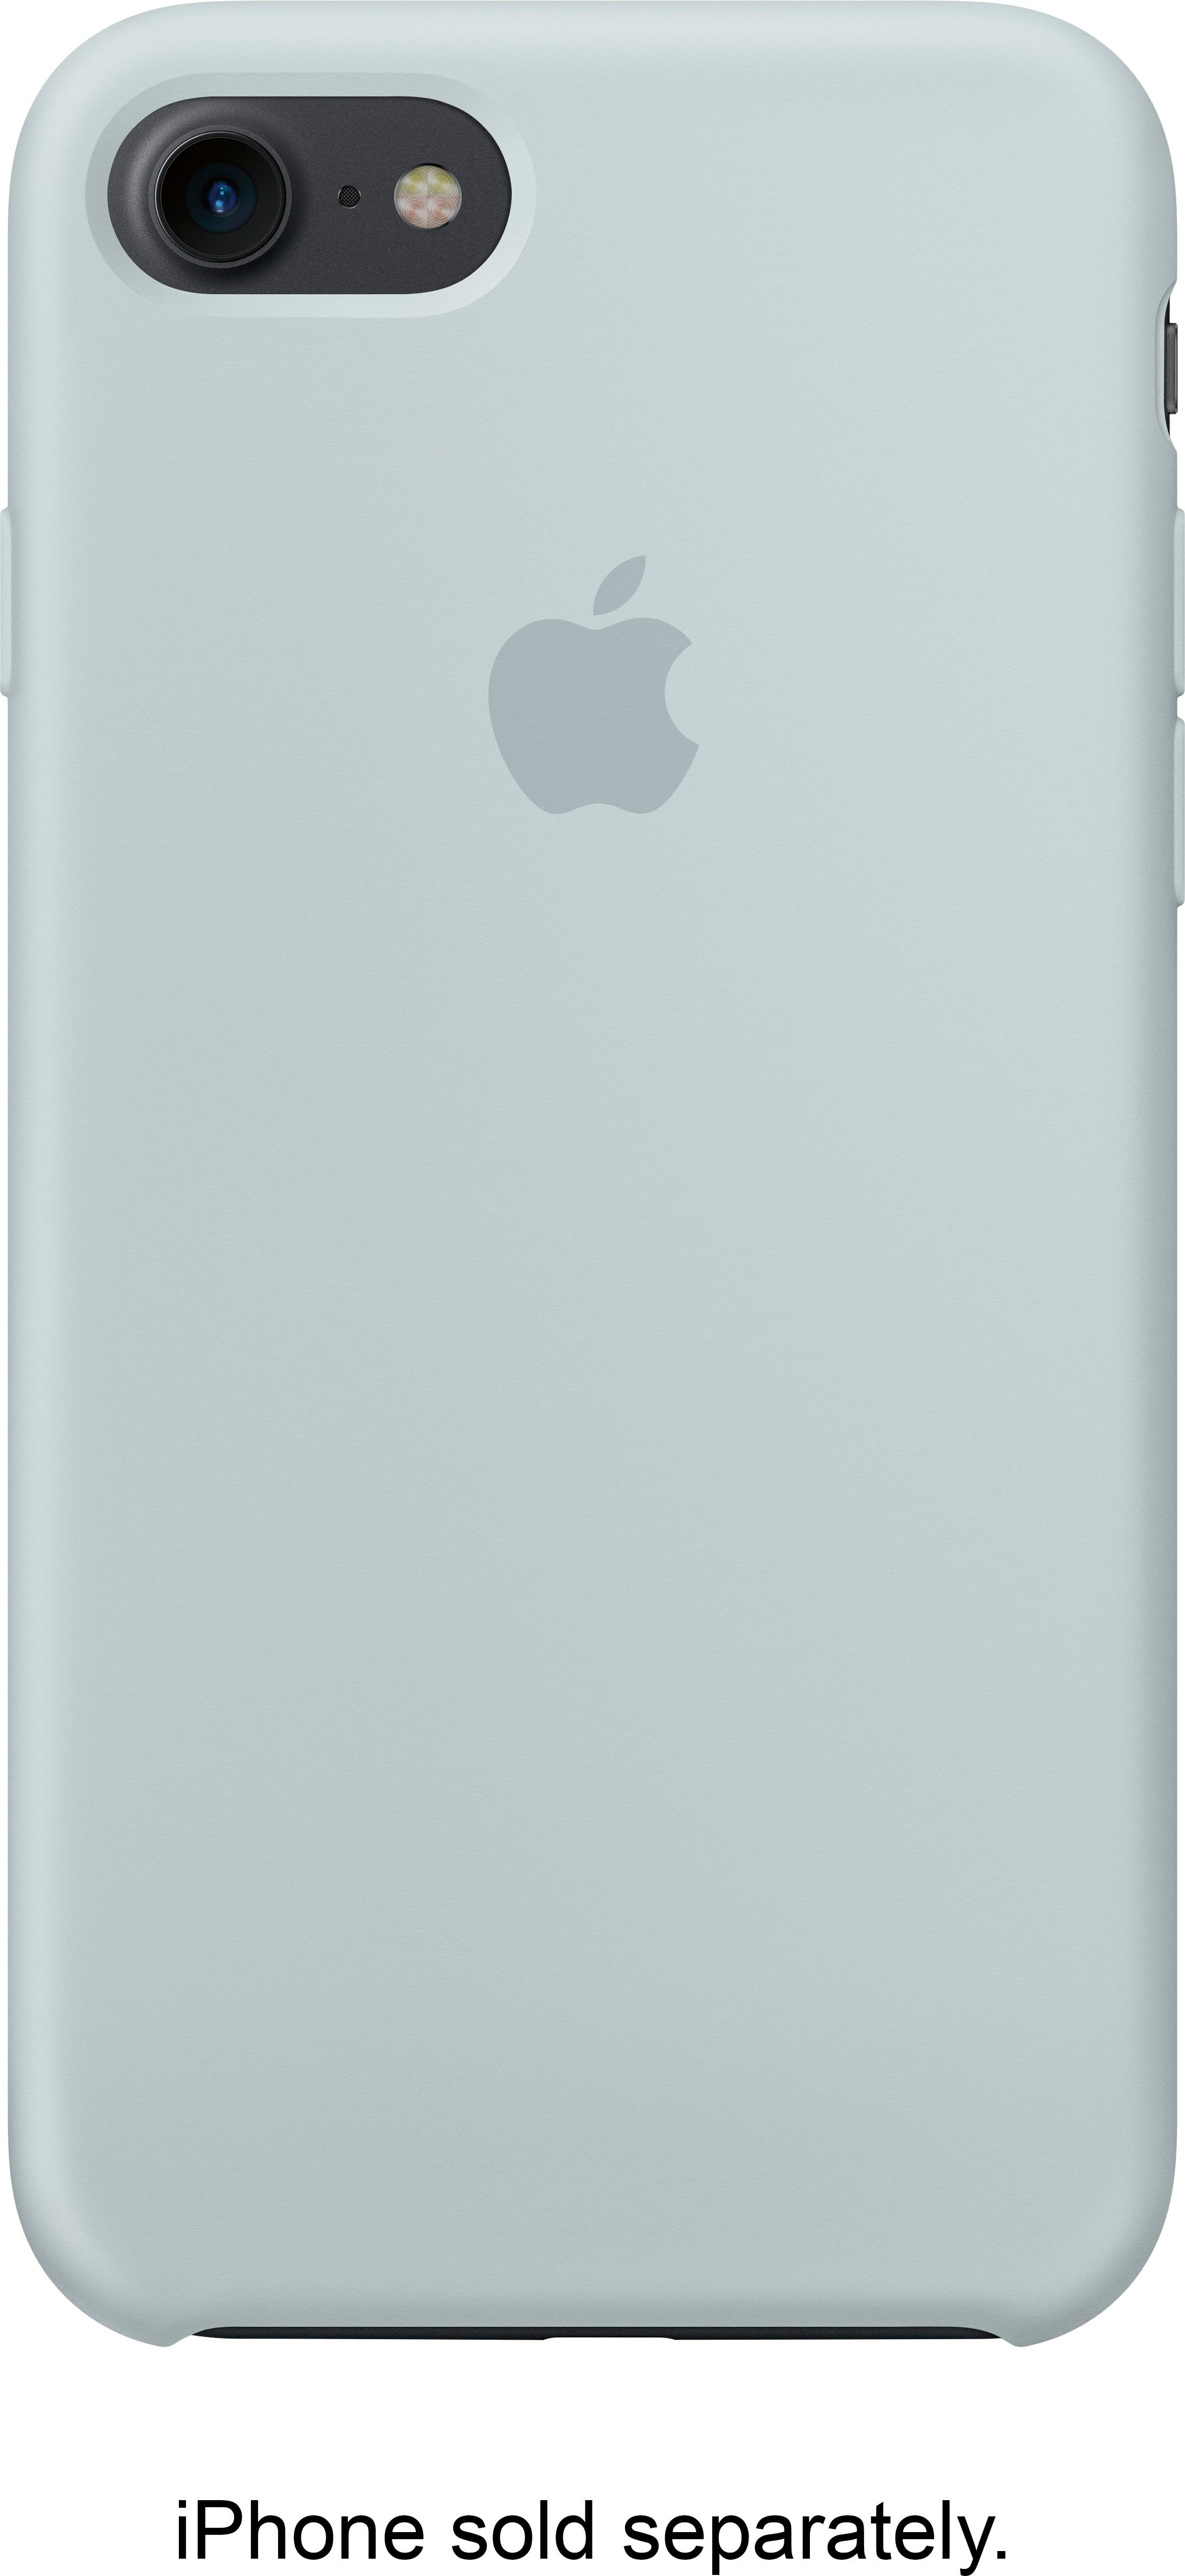 Best Buy Apple Iphone 7 Silicone Case Mist Blue Mq5zm A